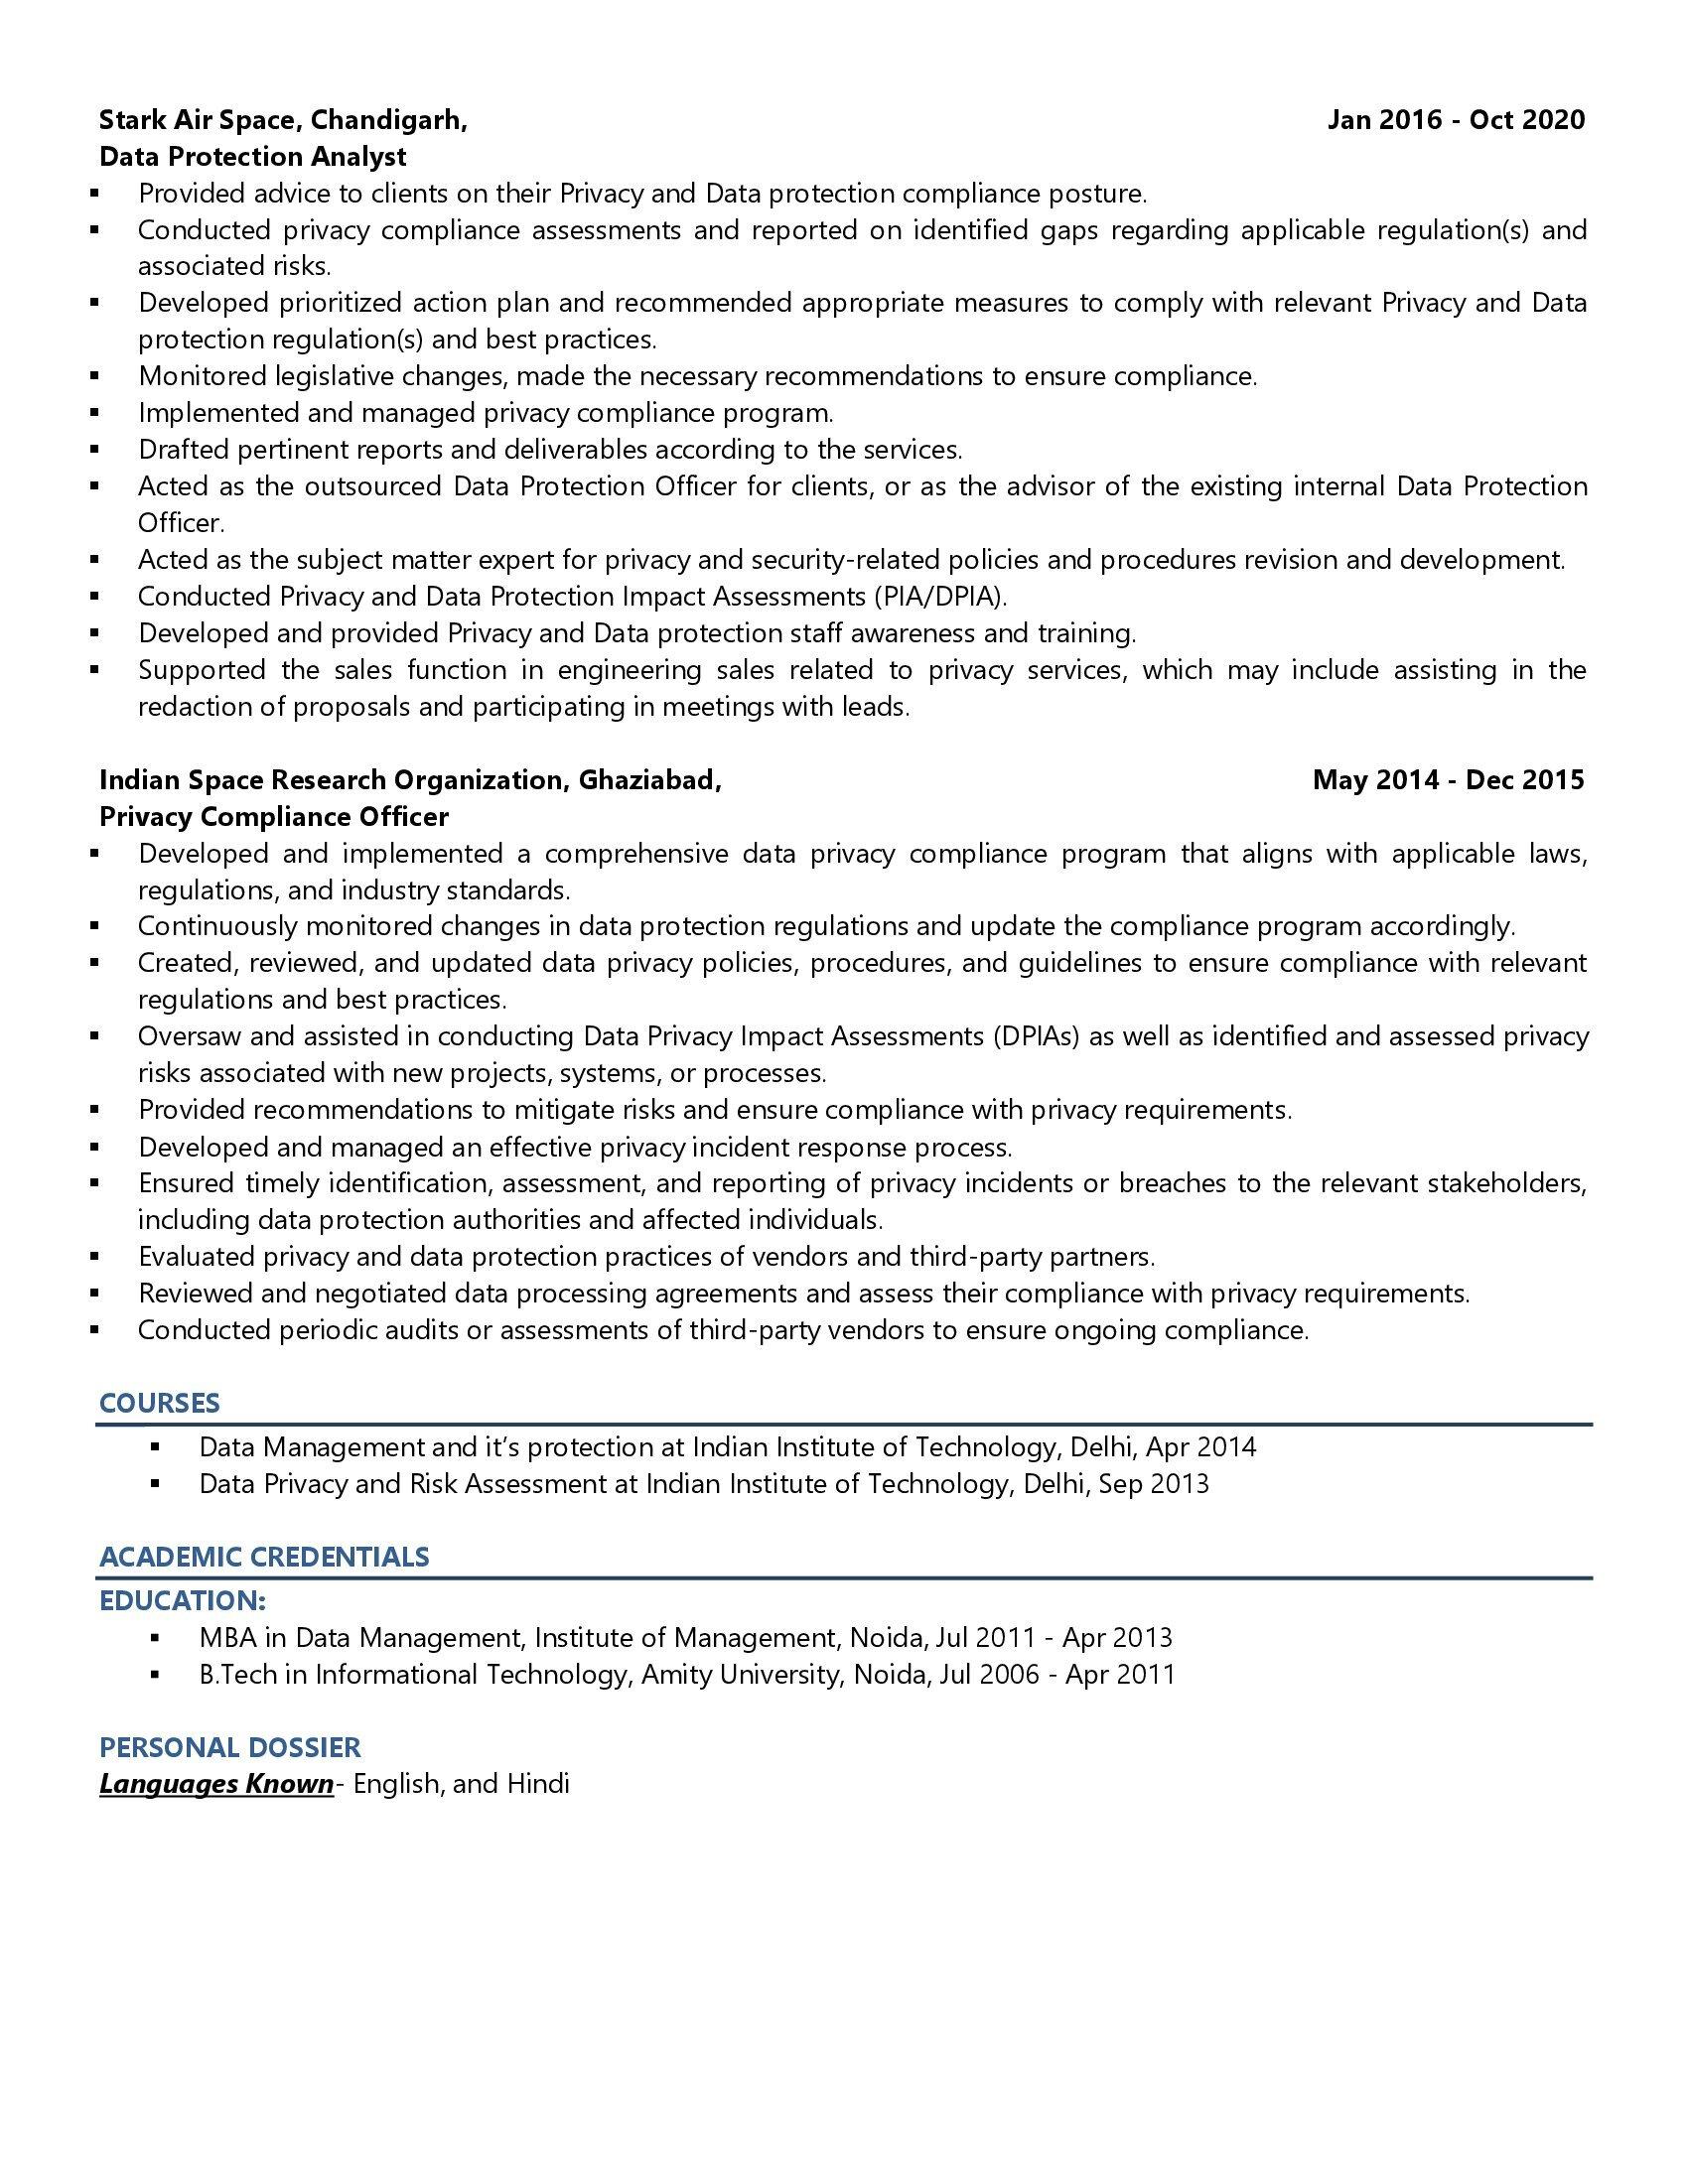 Data Protection Officer - Resume Example & Template